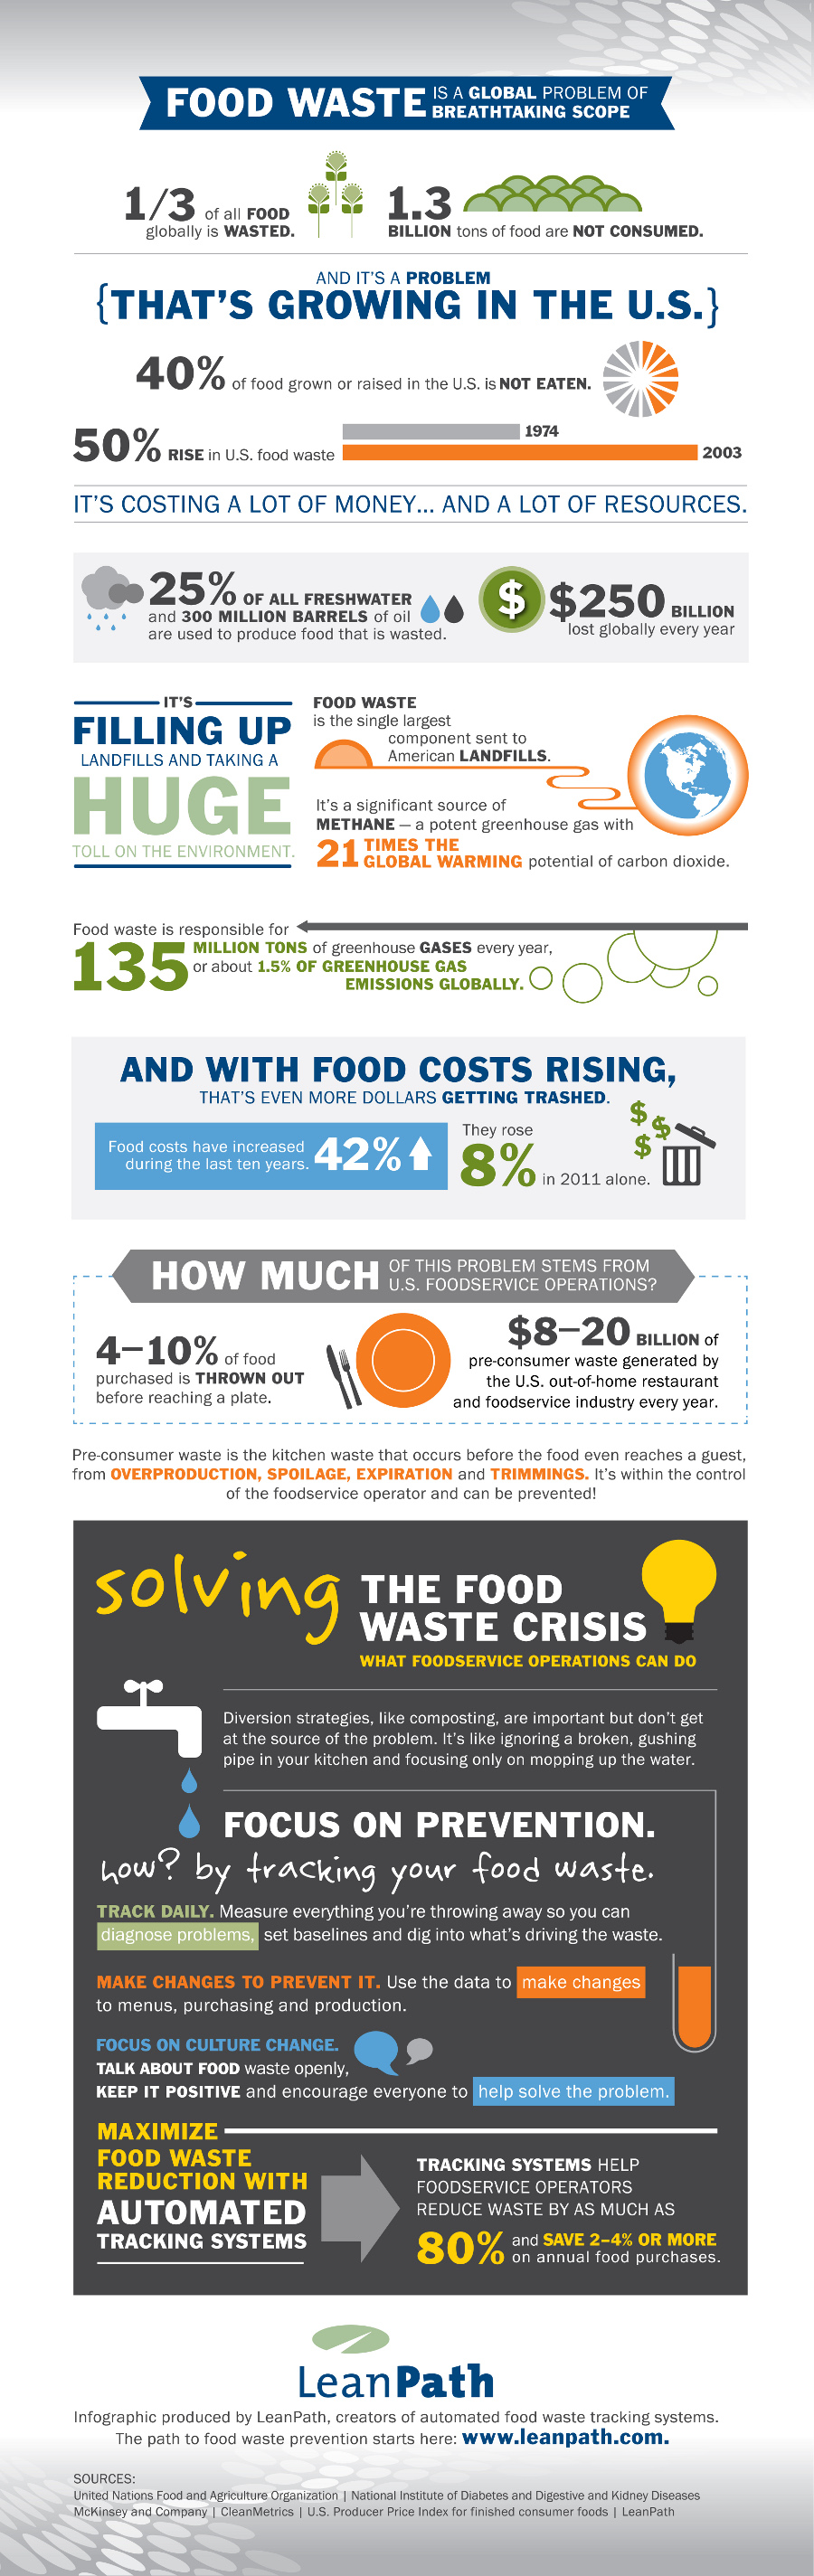 Food Waste Crisis: What Foodservice Operators Can Do